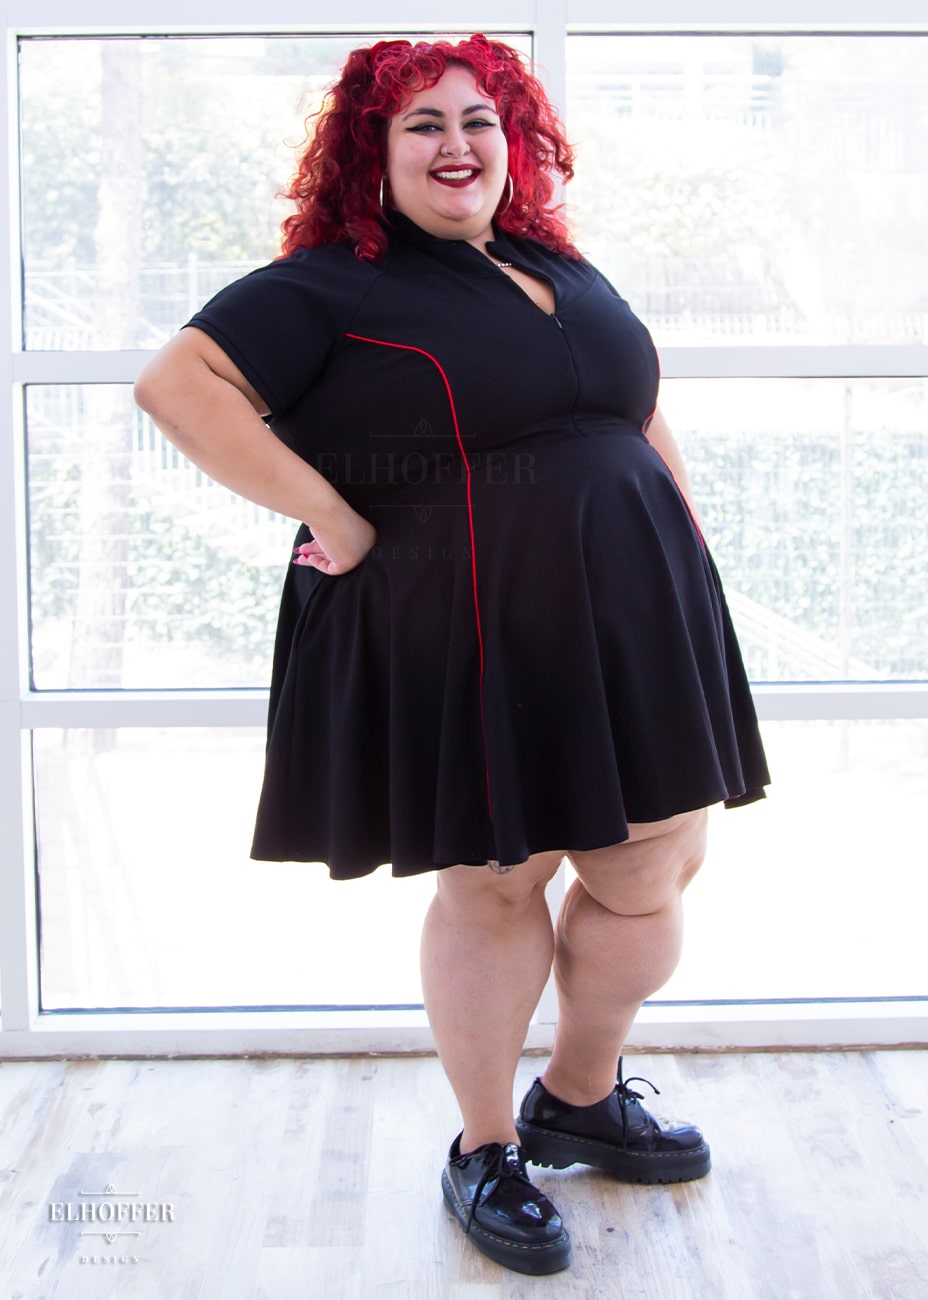 Victoria, an olive skinned size 4XL model with bright red curly hair, is wearing short raglan sleeved dress with a high neck, invisible front zipper, and princess seams on the front and back as well as pockets. The dress is black with red piping details.